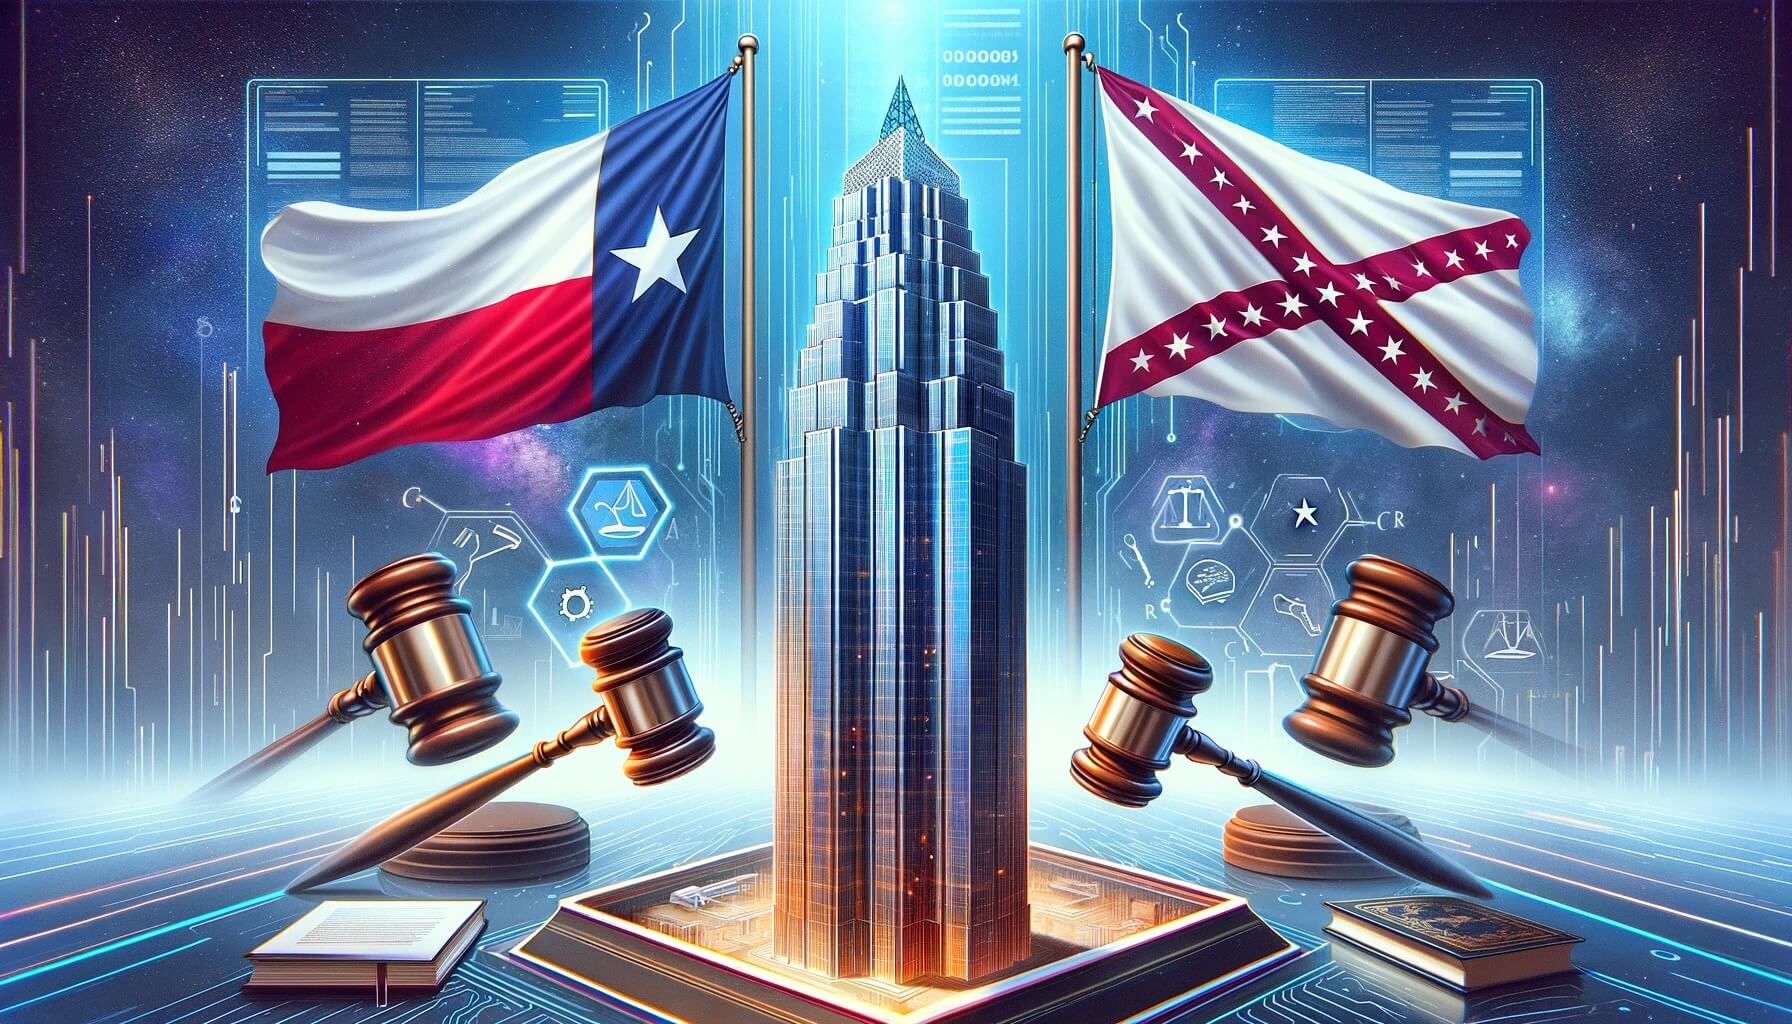 Texas, Alabama Securities Regulators Allege Fraud Against GS Partners In Multiple Crypto Schemes - CryptoInfoNet